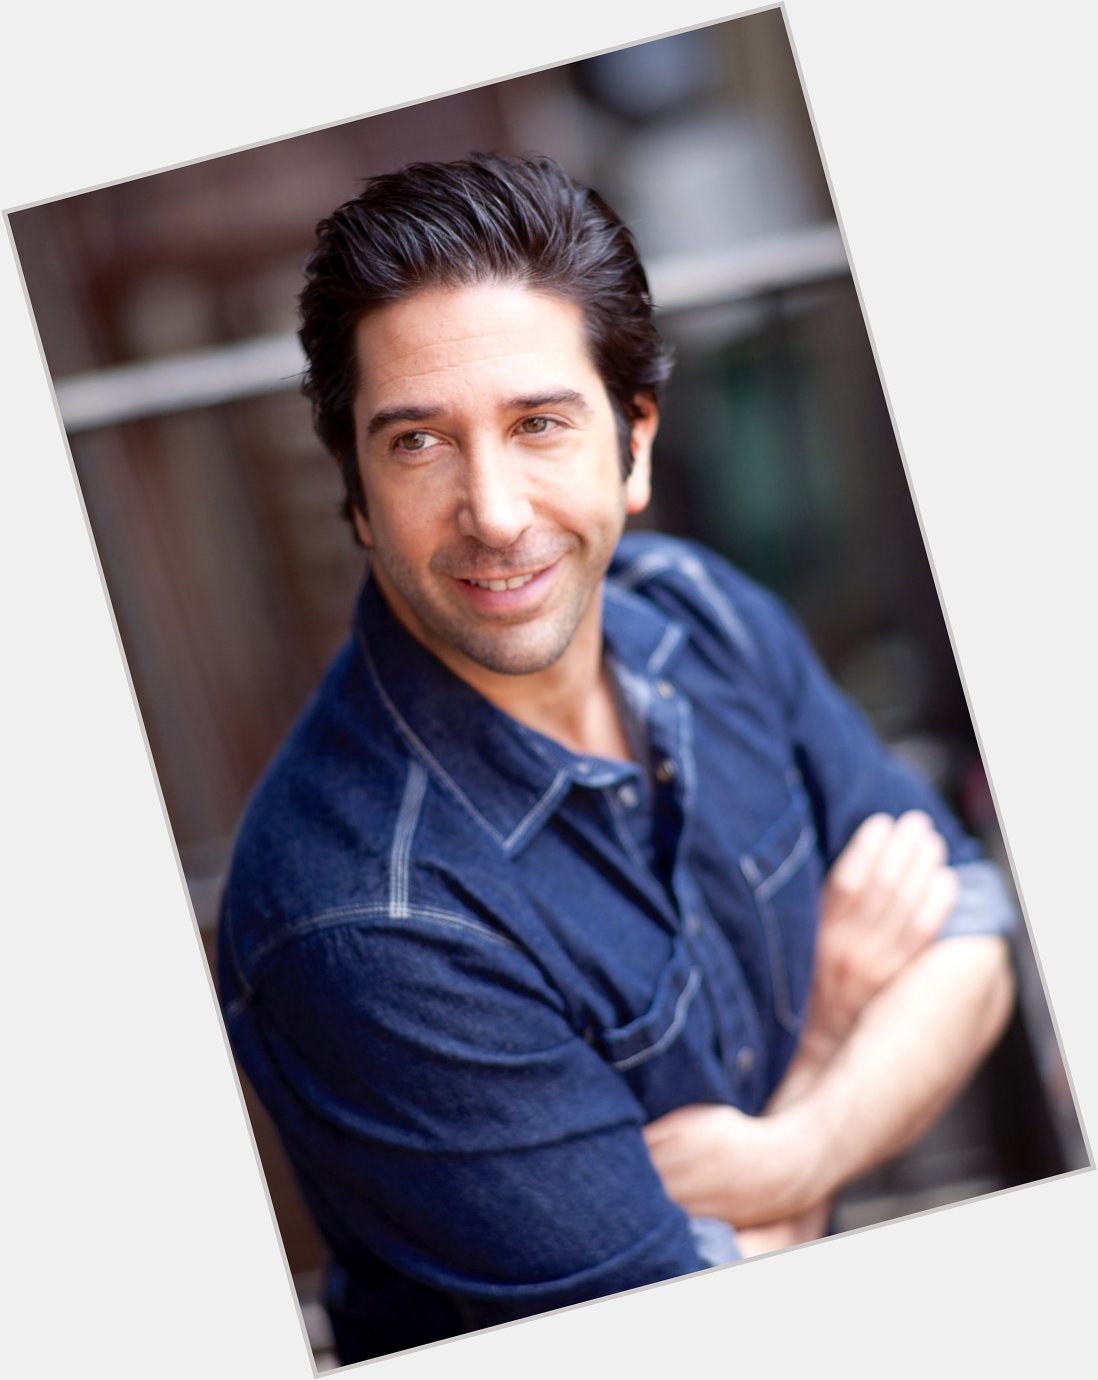 Happy birthday to David Schwimmer, who turns 55 today! 